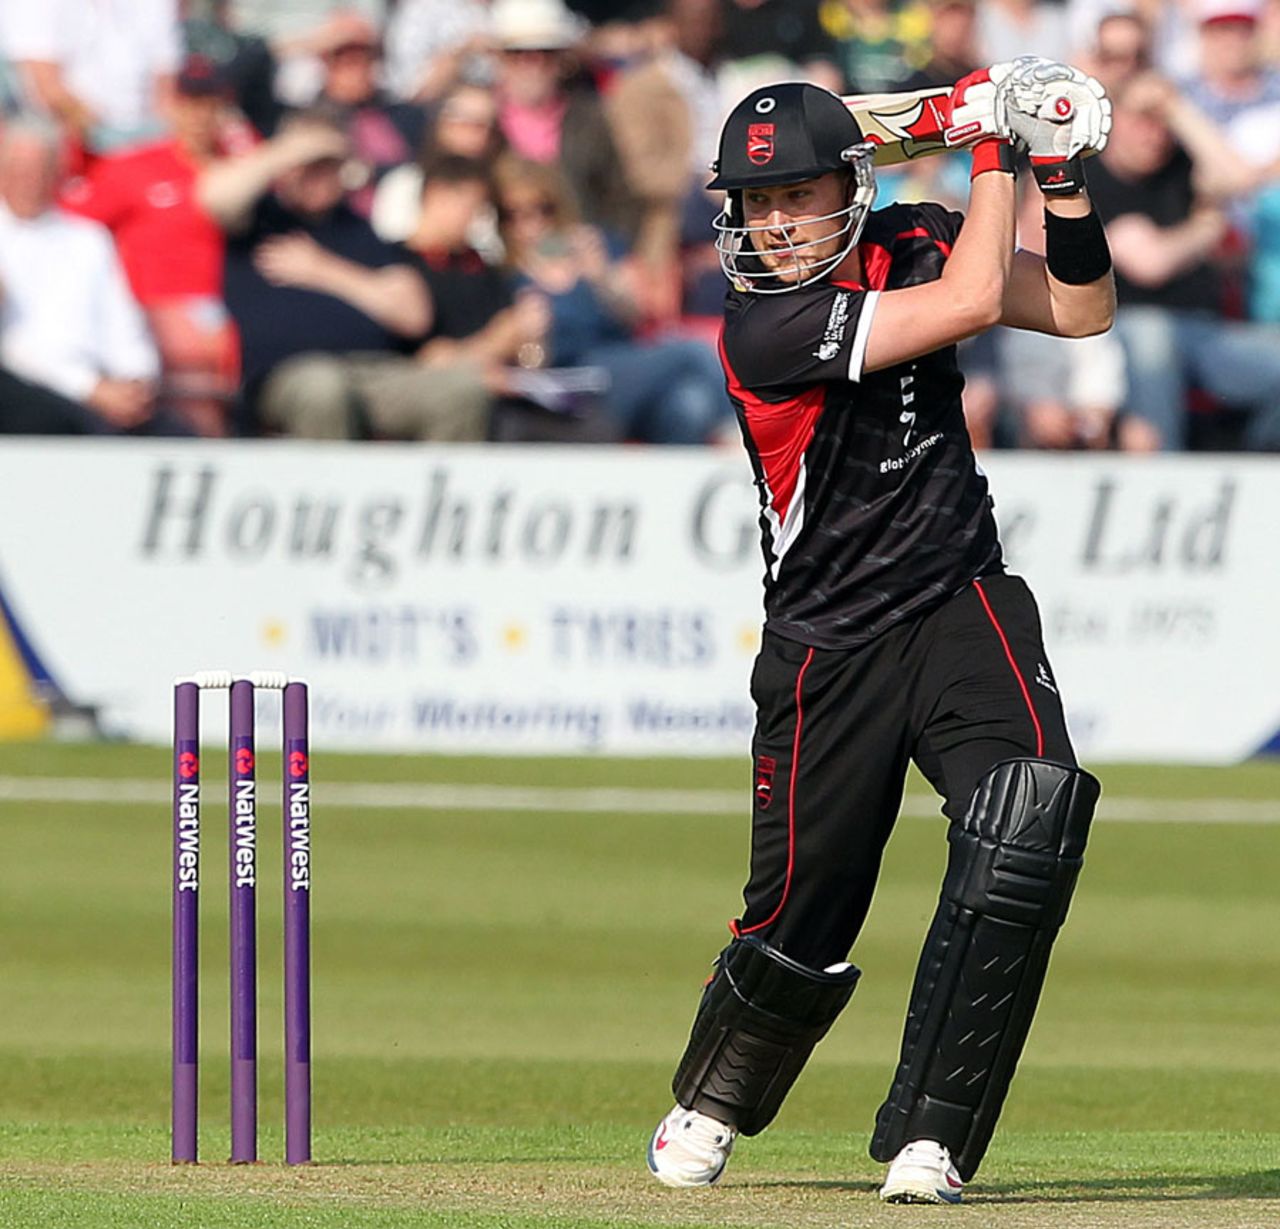 Josh Cobb made 38 in 28 balls, Leicestershire v Derbyshire, NatWest T20 Blast, Grace Road, May 16, 2014